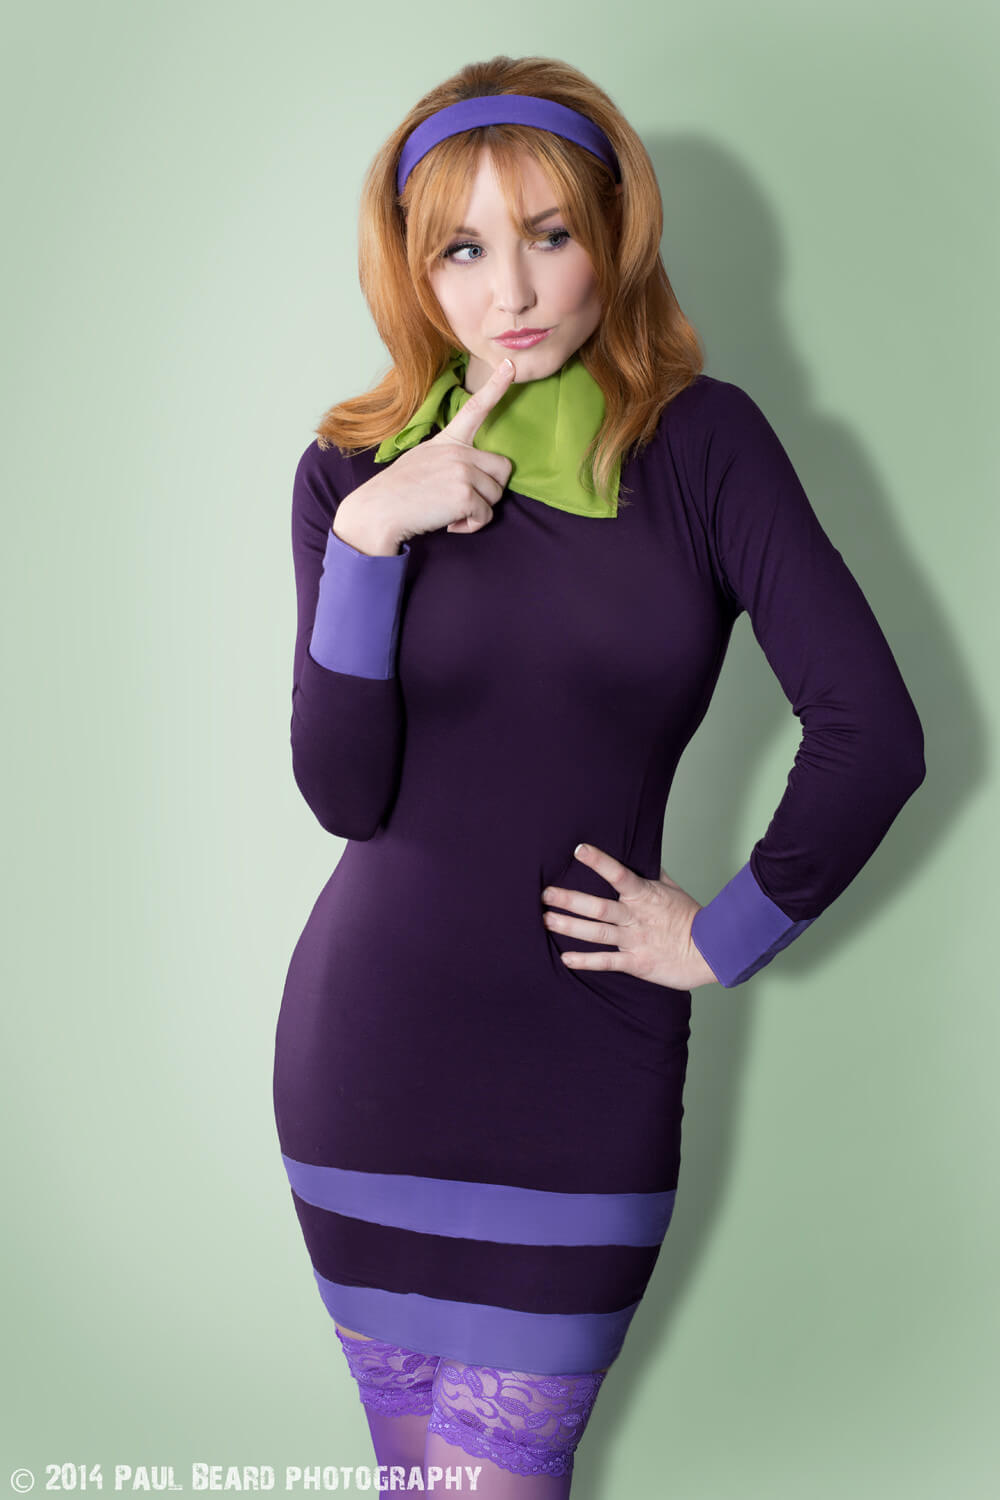 70+ Hot Pictures Of Daphne Blake From Scooby Doo Which Are Sure to Catch Your Attention 31